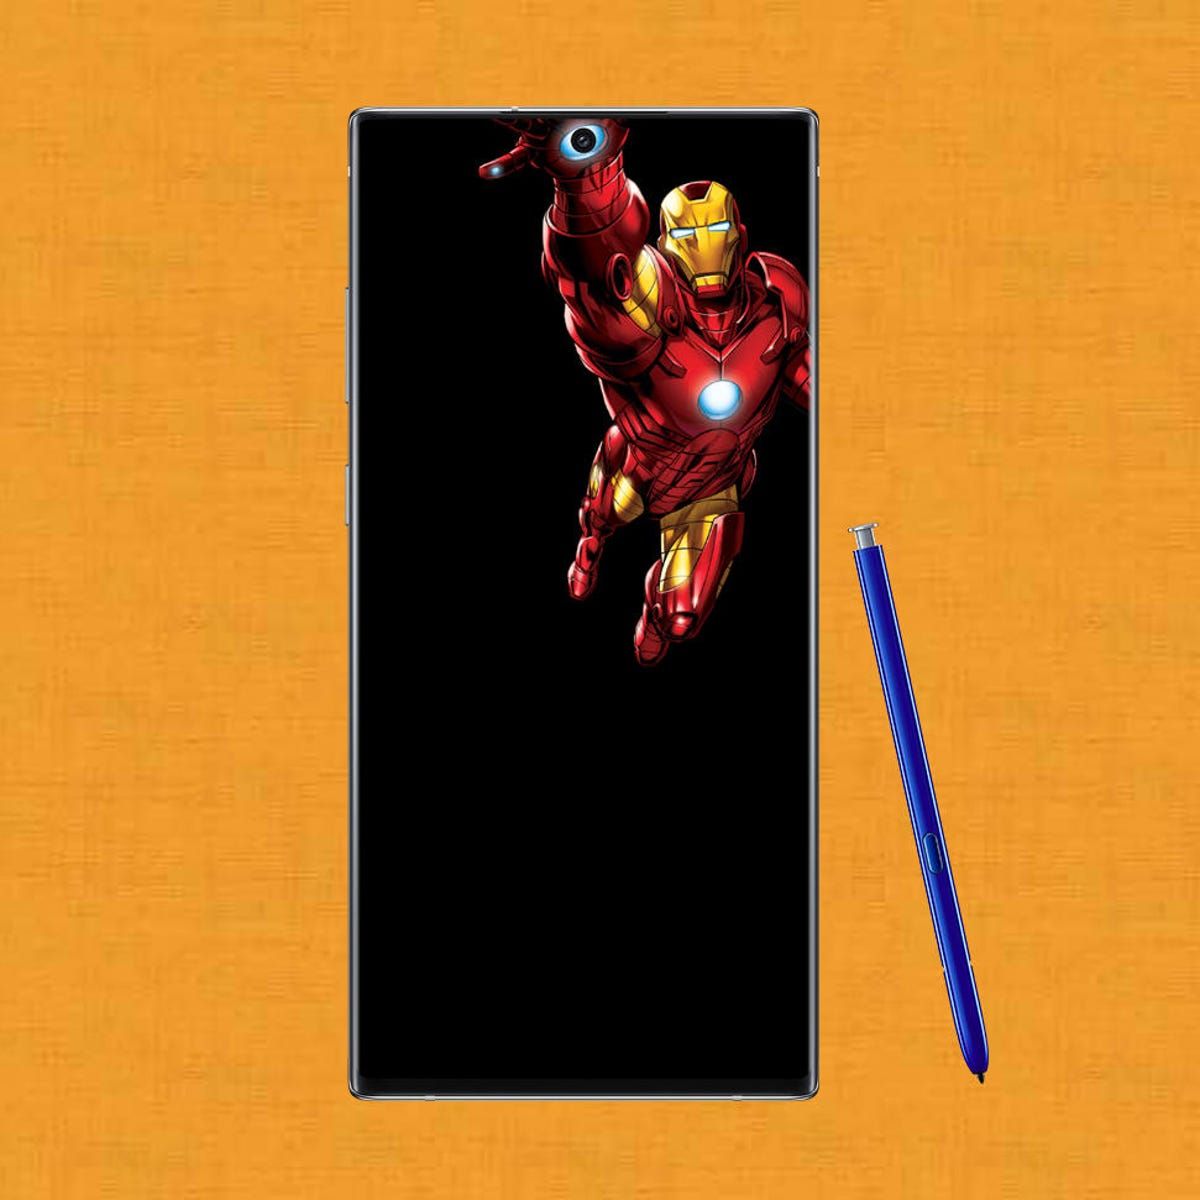 New Marvel Avengers Note 10 wallpaper are here, and installing them is easy